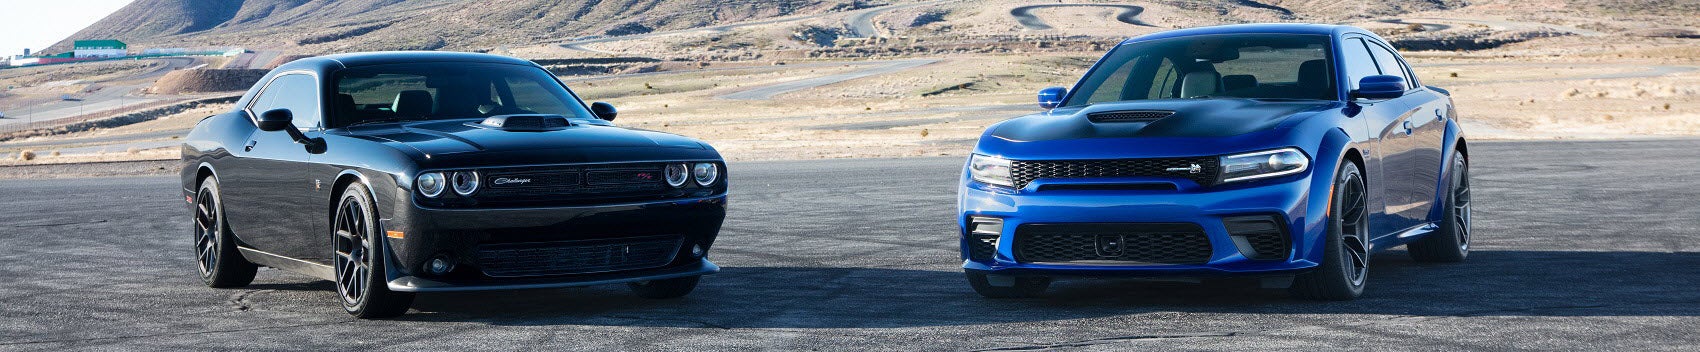 2020 Dodge Challenger & Charger